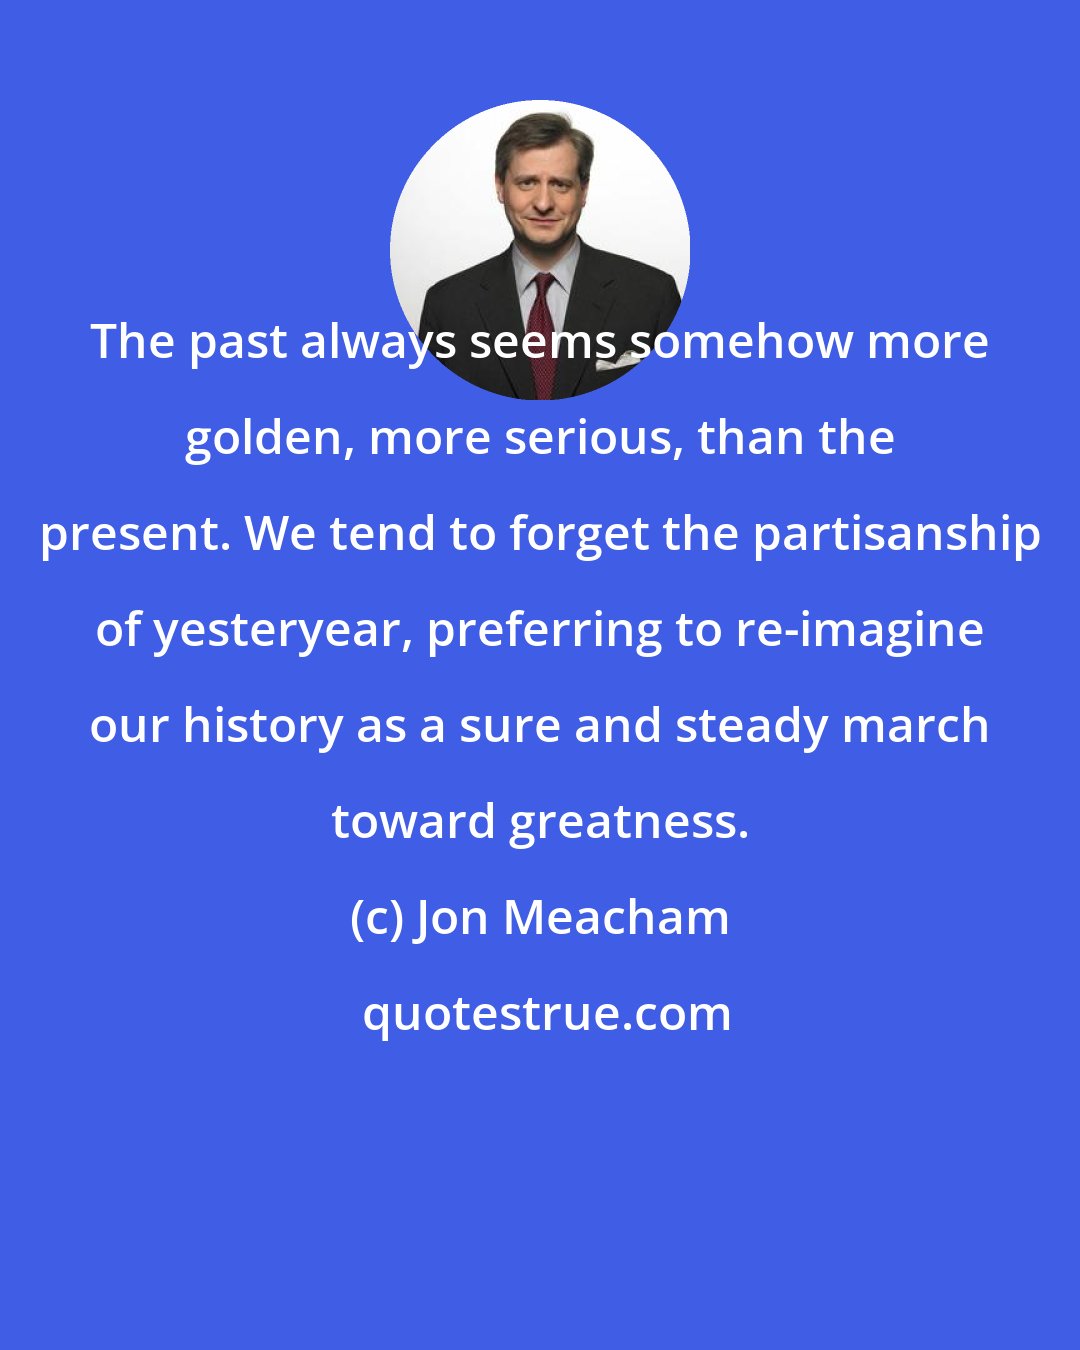 Jon Meacham: The past always seems somehow more golden, more serious, than the present. We tend to forget the partisanship of yesteryear, preferring to re-imagine our history as a sure and steady march toward greatness.